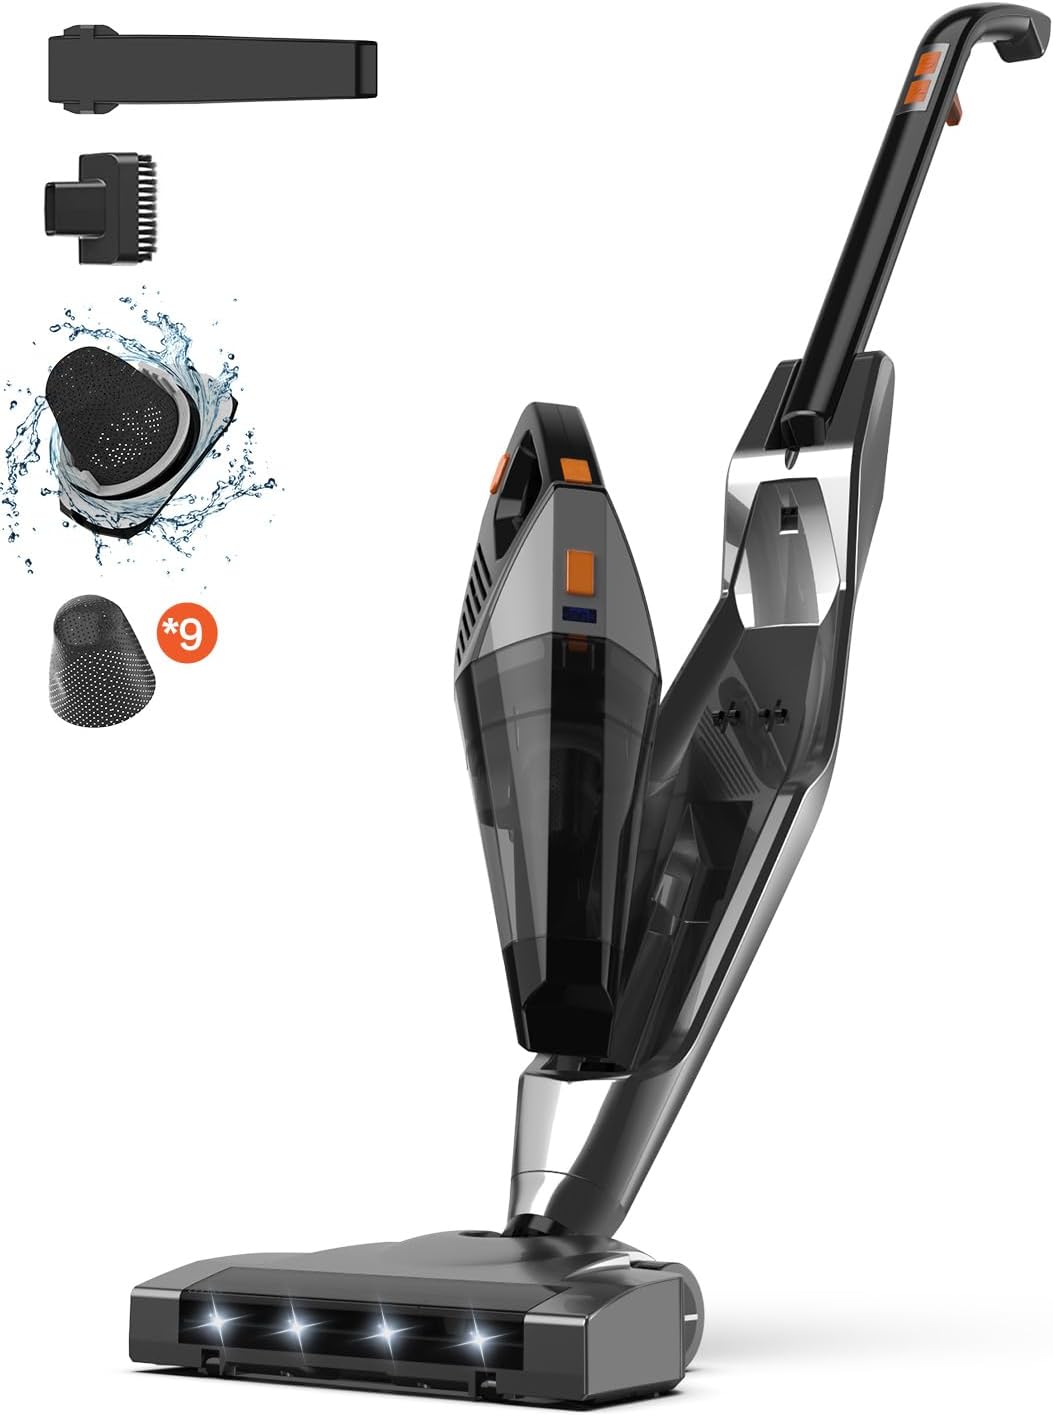 Hihhy Cordless Vacuum Cleaner Review: Powerful and Versatile Cleaning Solution